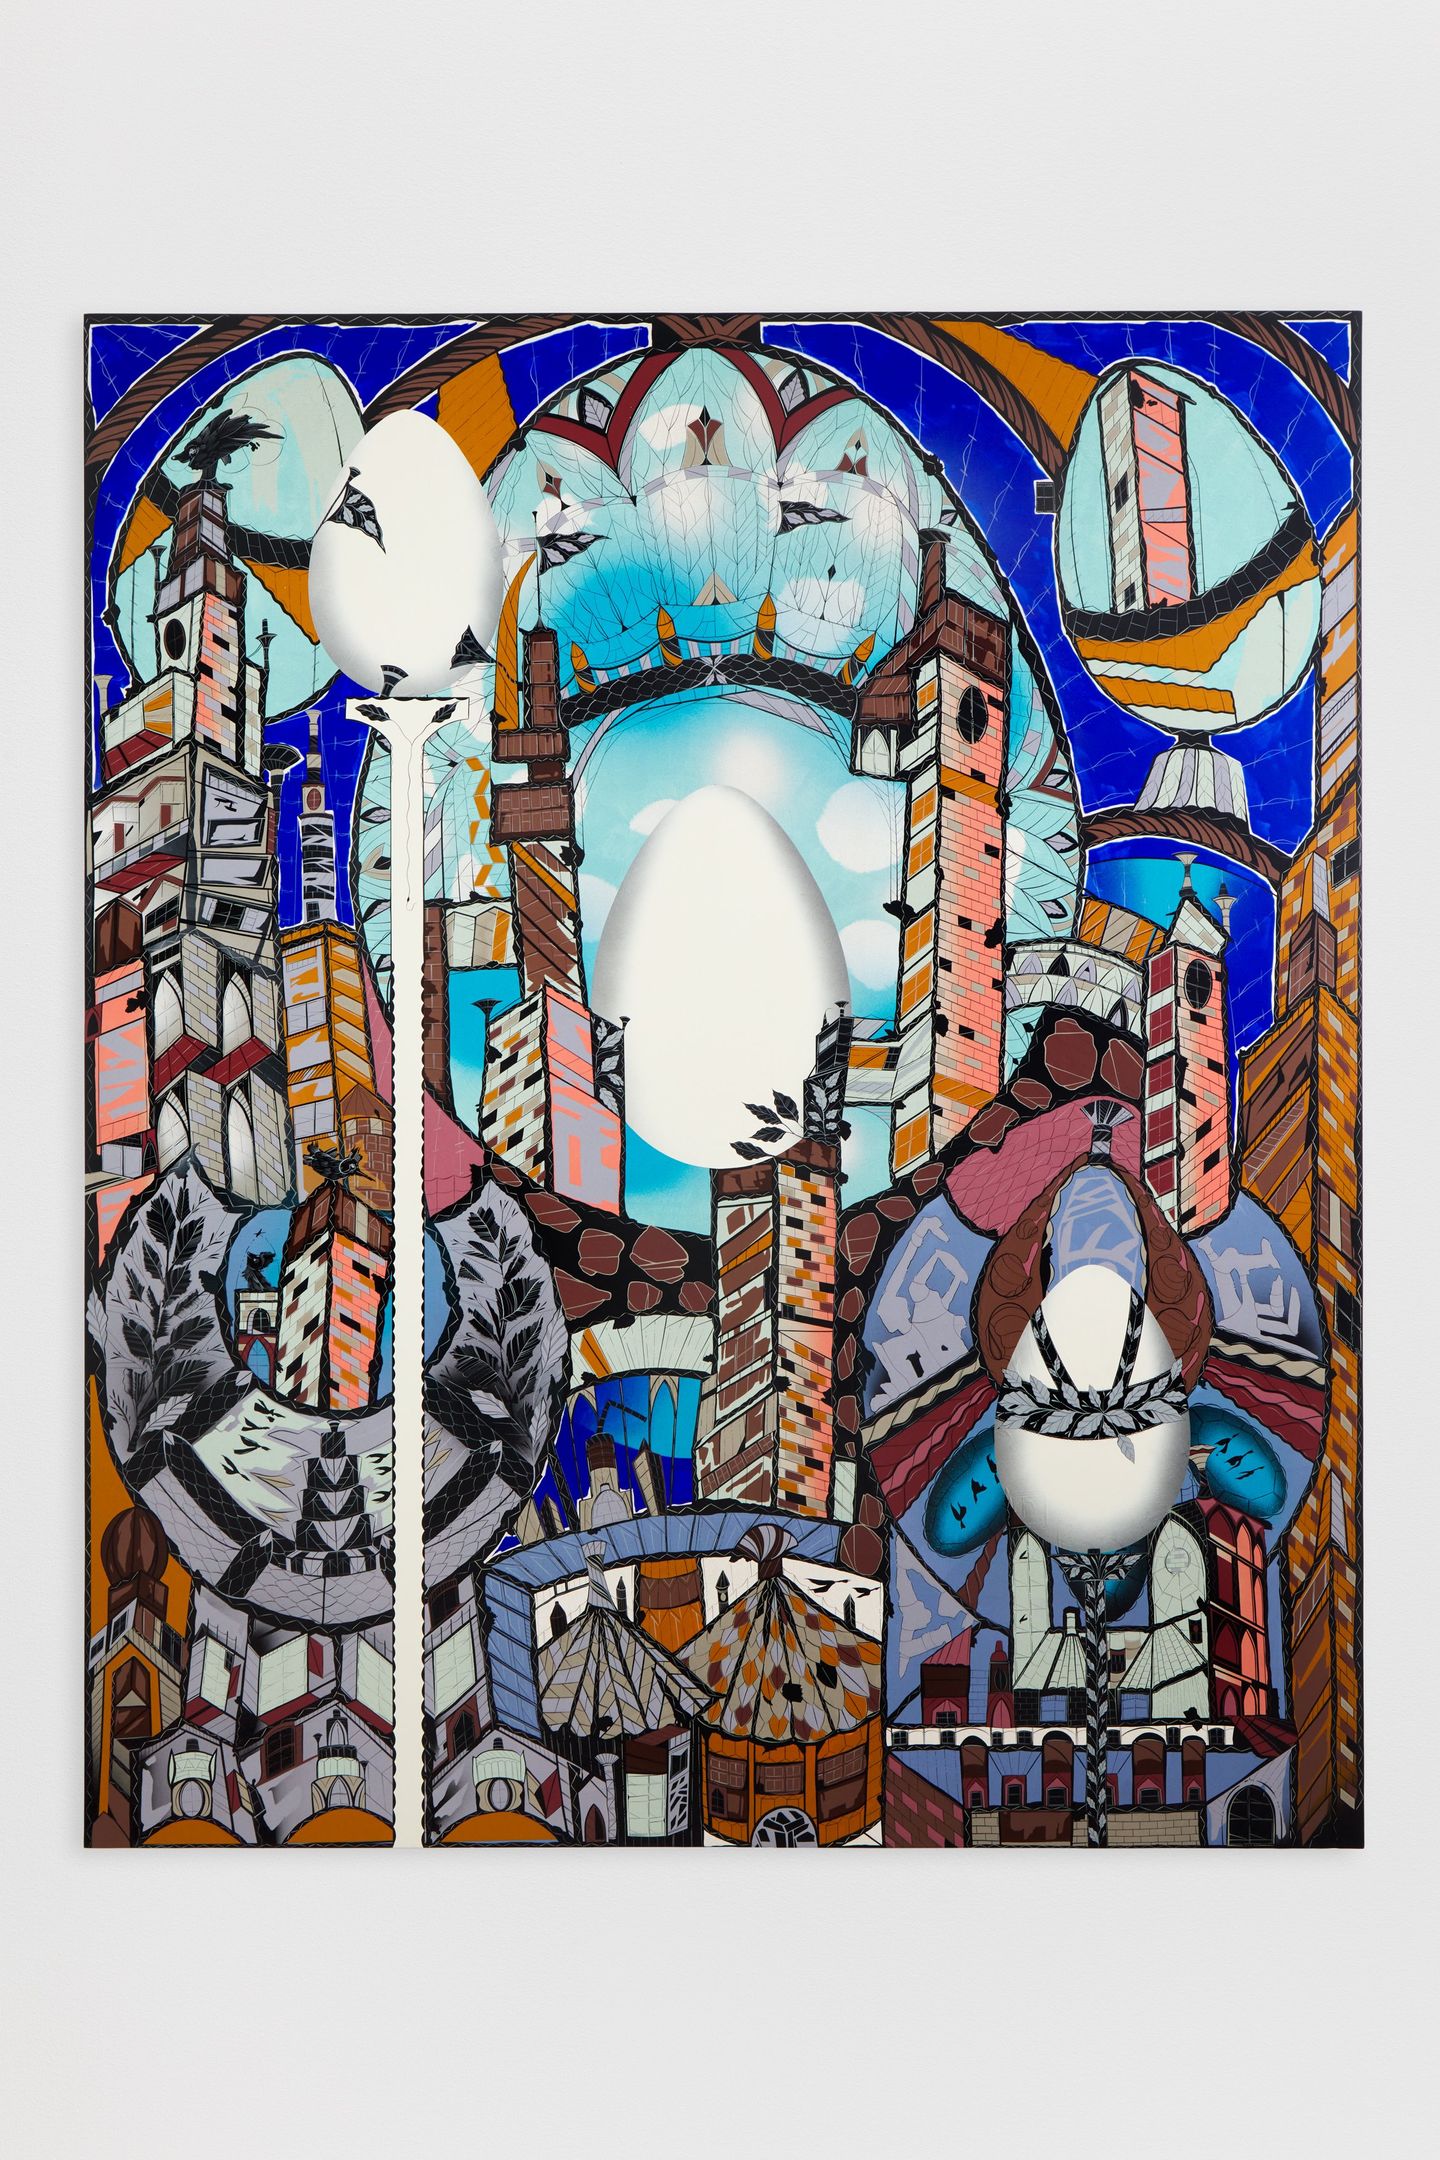 Lari Pittman, Luminous: Cities with Egg Monuments 3 (2022). Cel-vinyl and lacquer spray over gessoed canvas on titanium and wood panel. 243.8 x 203.2 cm. © Lari Pittman. Courtesy Regen Projects, Los Angeles and Lehmann Maupin, New York, Hong Kong, and Seoul. Photo: Evan Bedford.